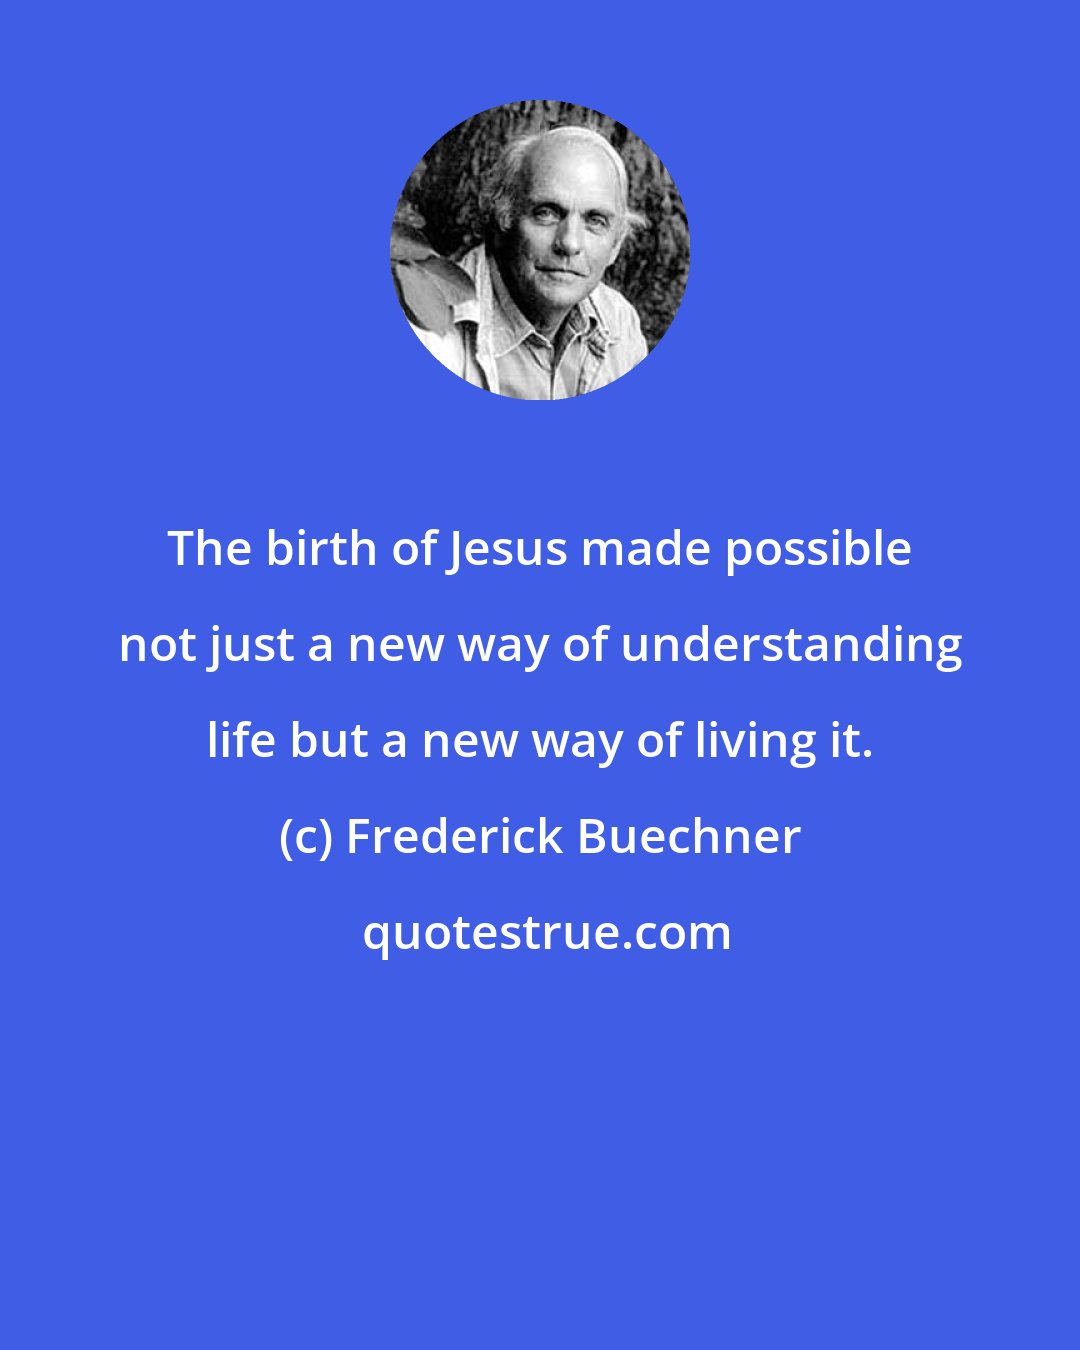 Frederick Buechner: The birth of Jesus made possible not just a new way of understanding life but a new way of living it.